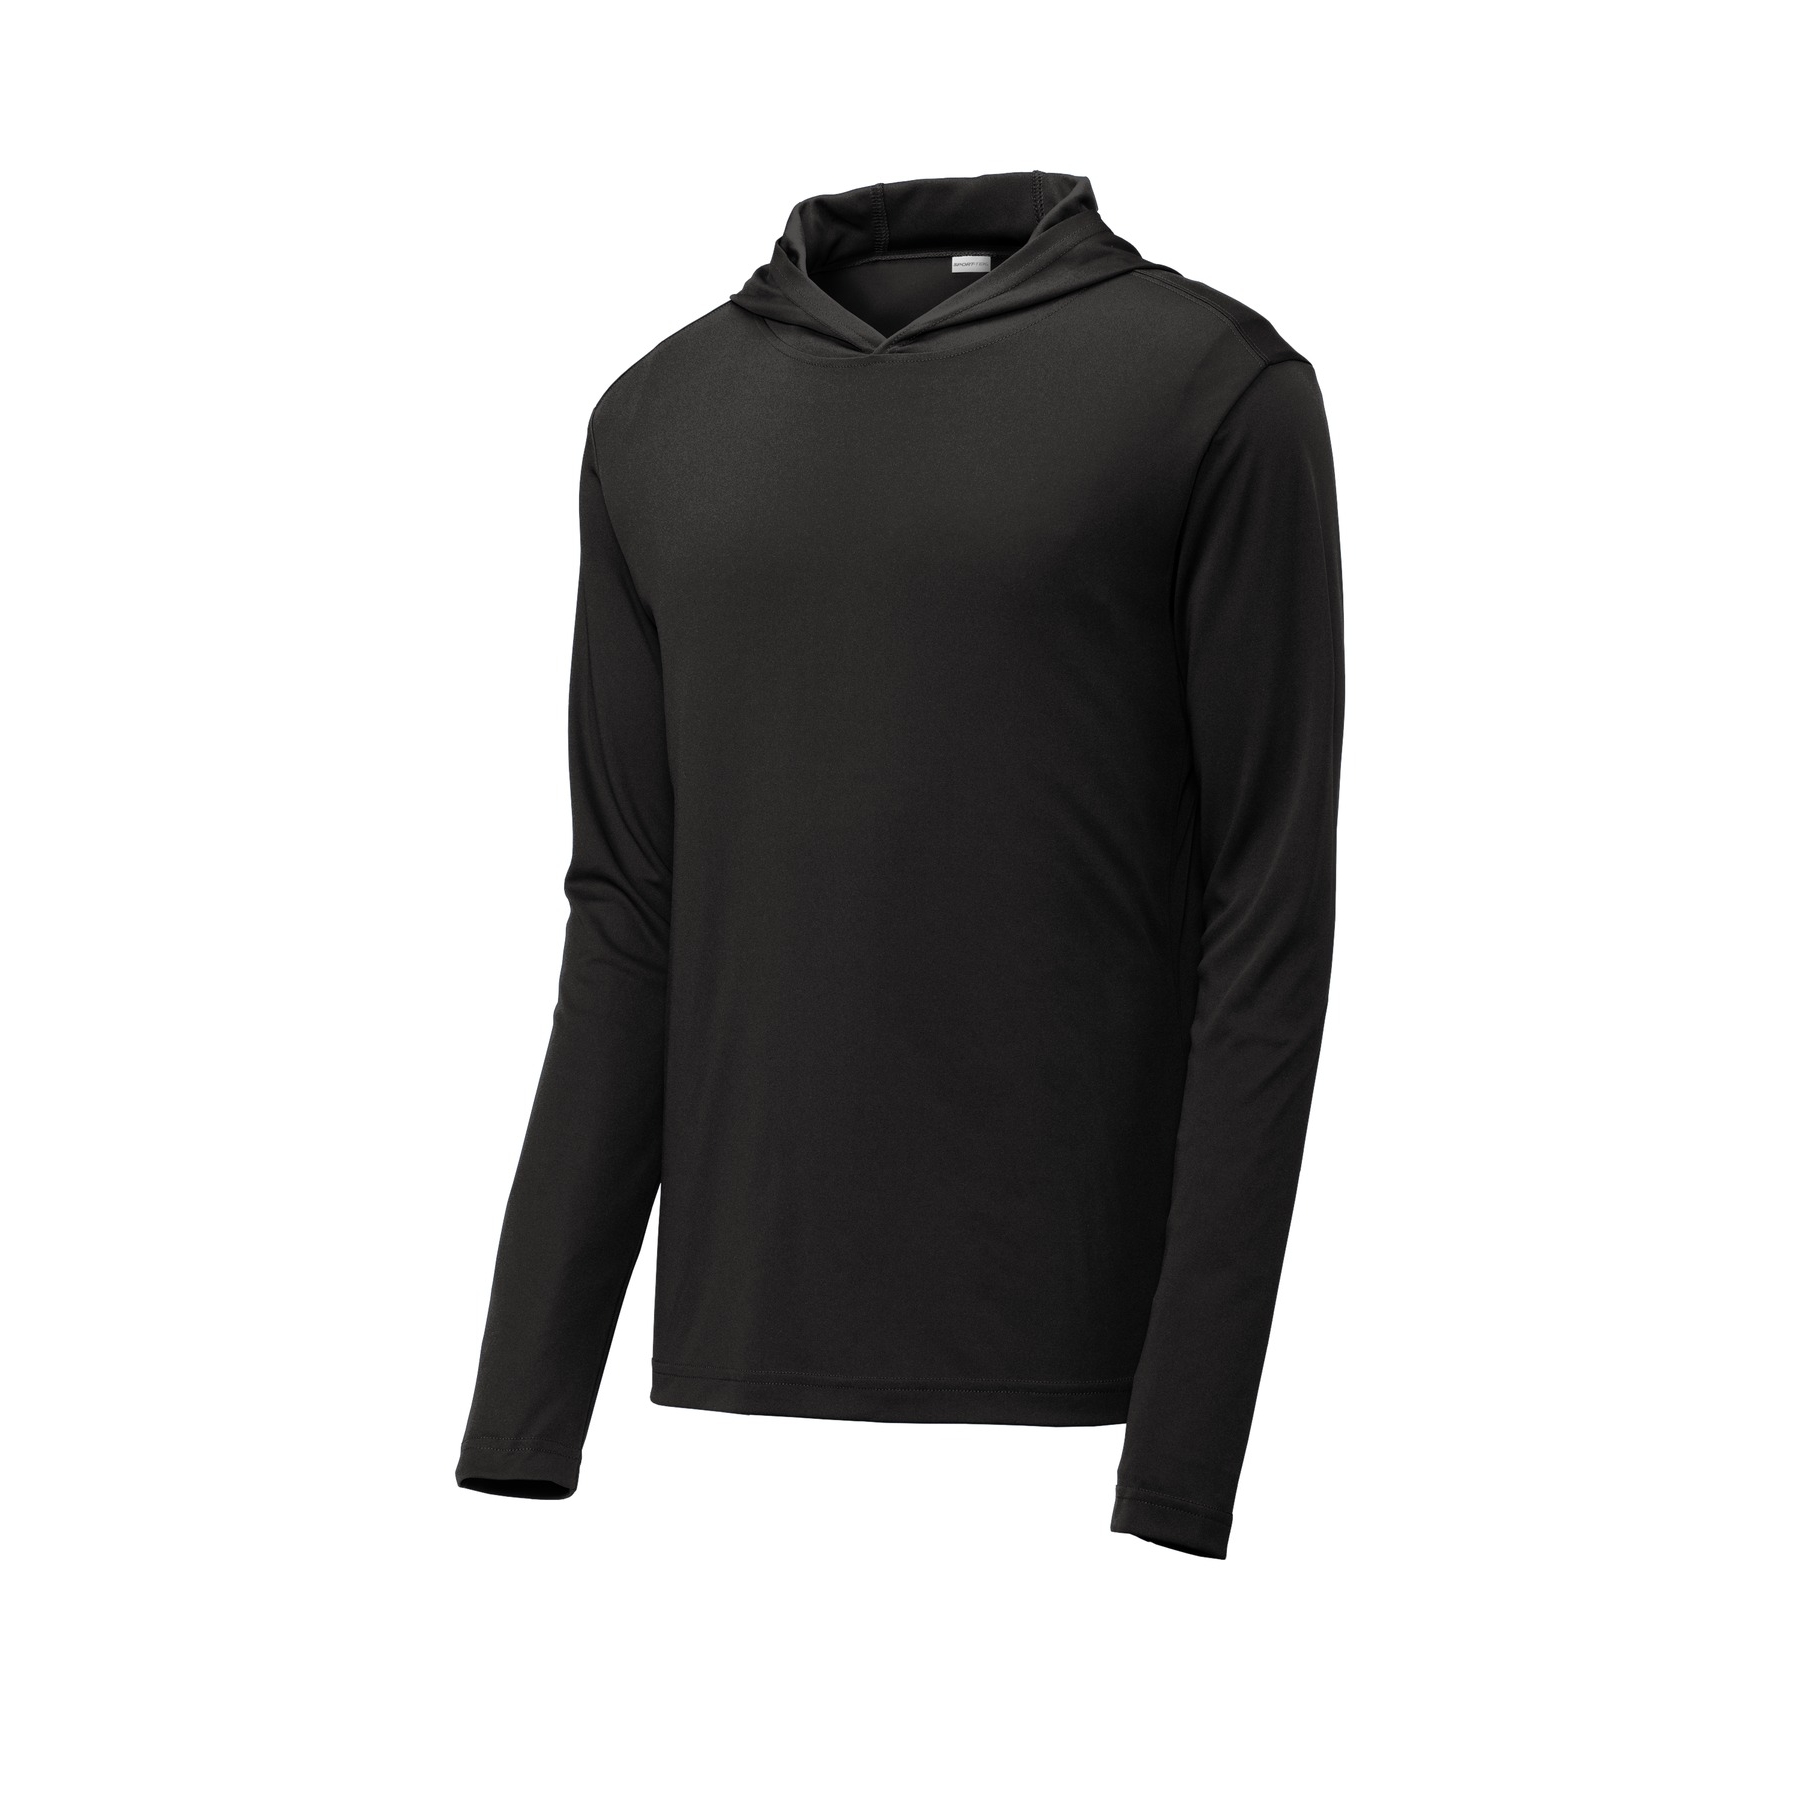 Sport-tek ® Posicharge ® Competitor ™ Hooded Pullover | Colman and Company